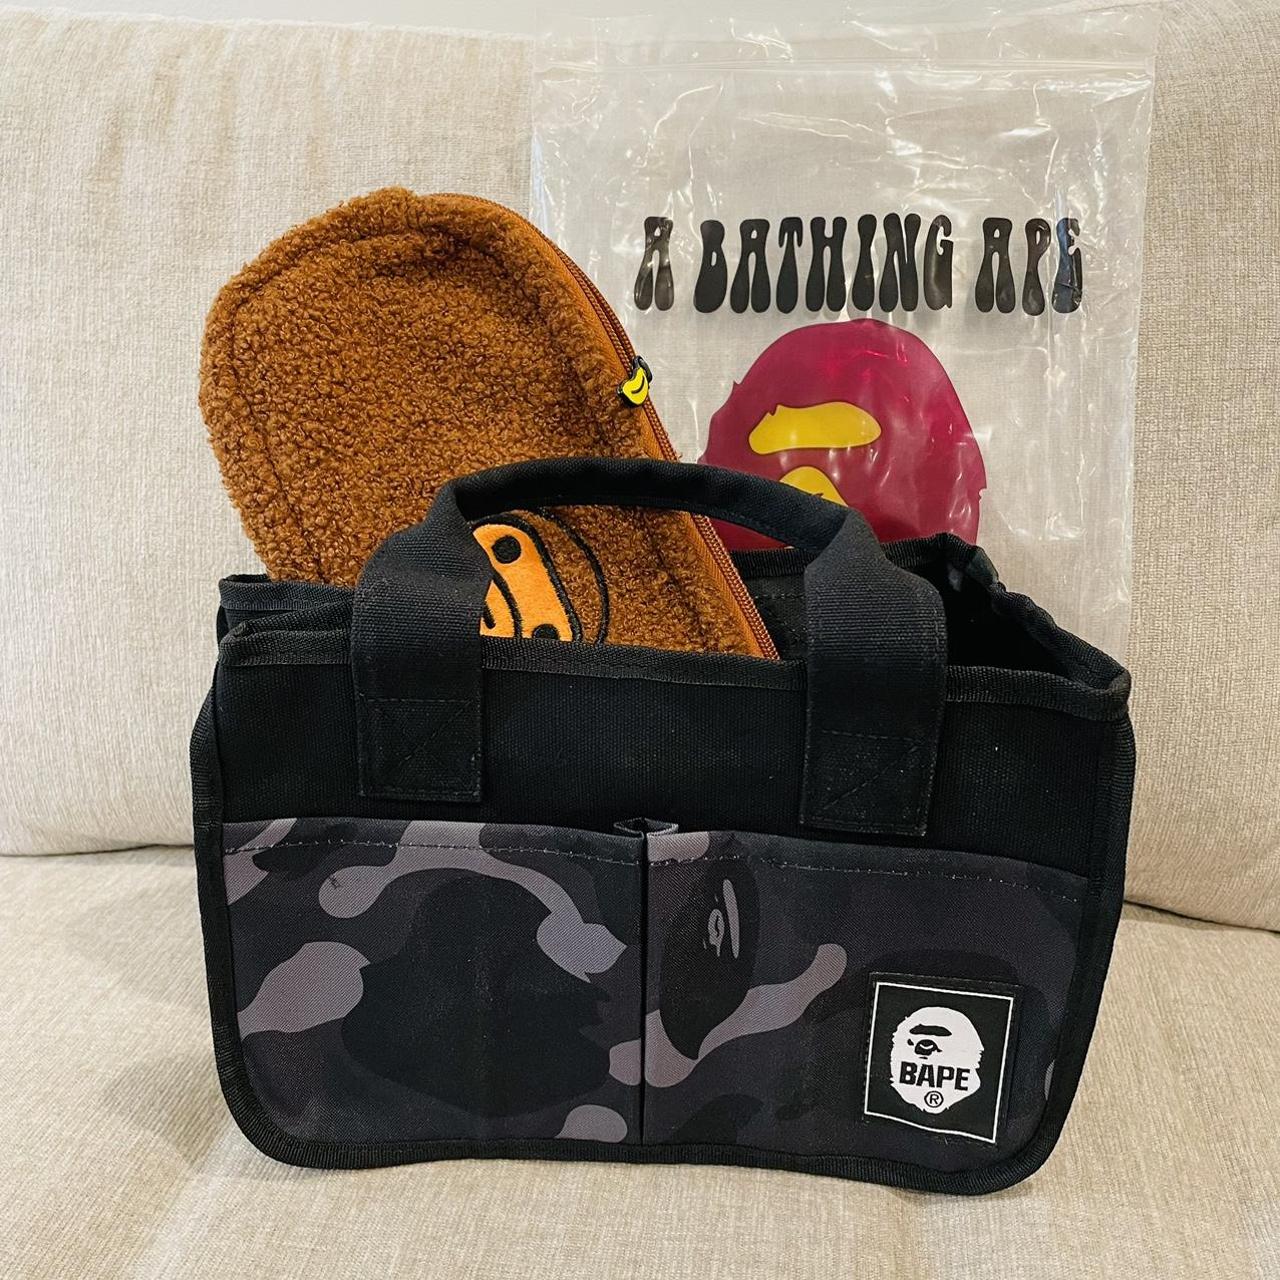 A Bathing Ape Tote Bags for Sale